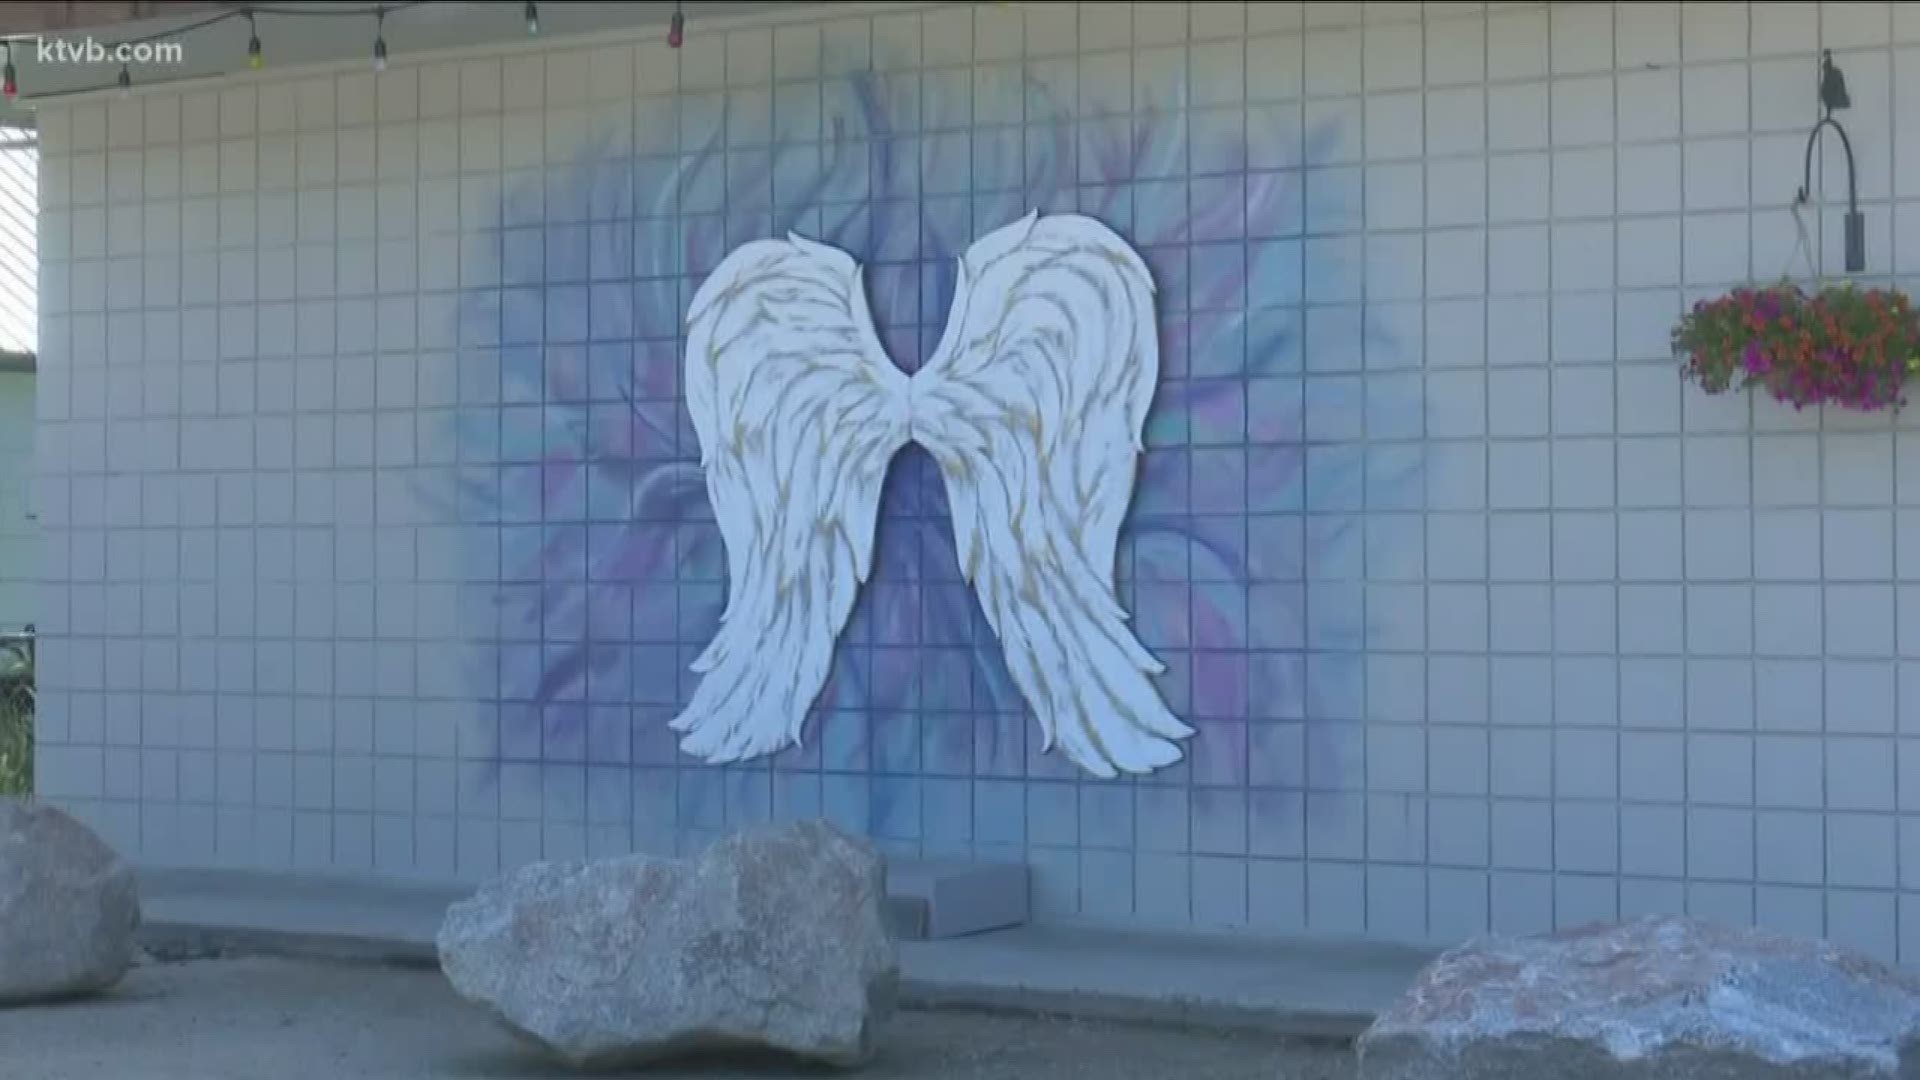 Shaleesa Stevens is using her talents to brighten up businesses in her town.